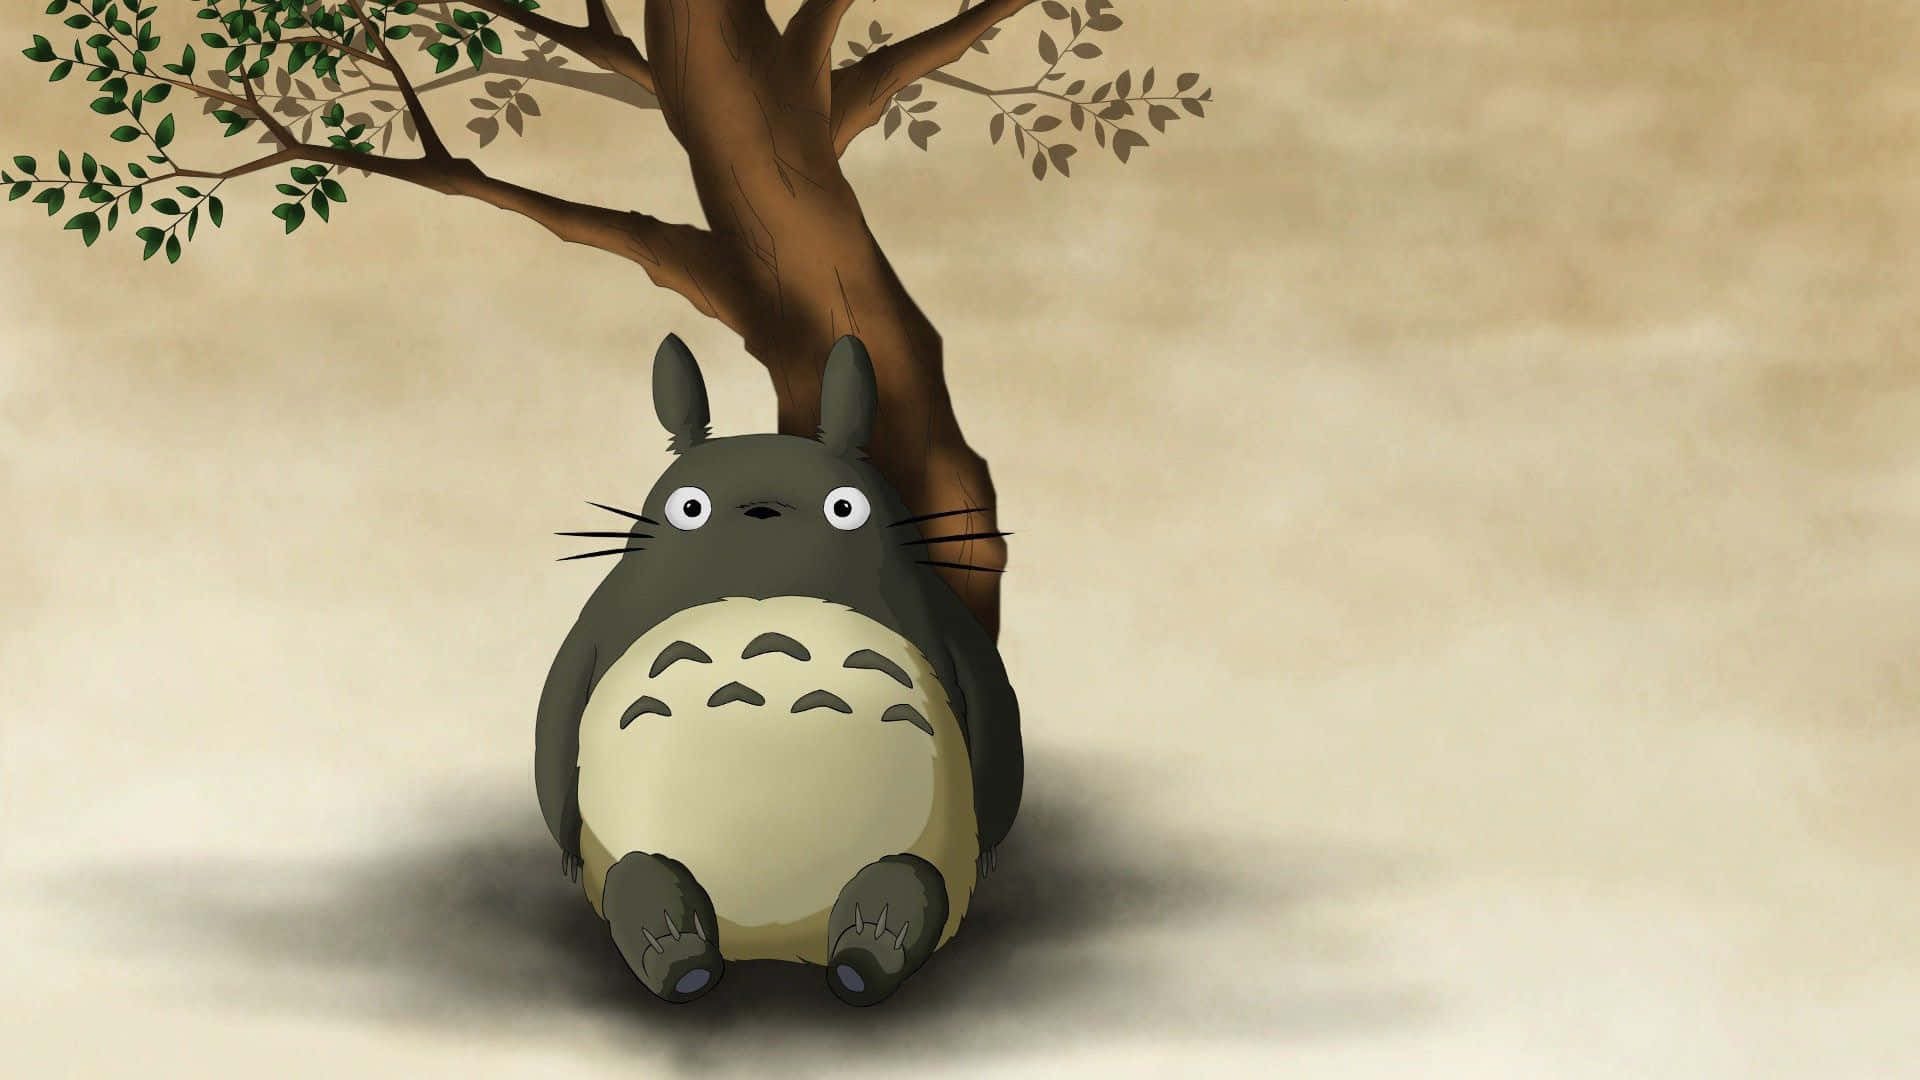 “Welcome to the magical world of Totoro”